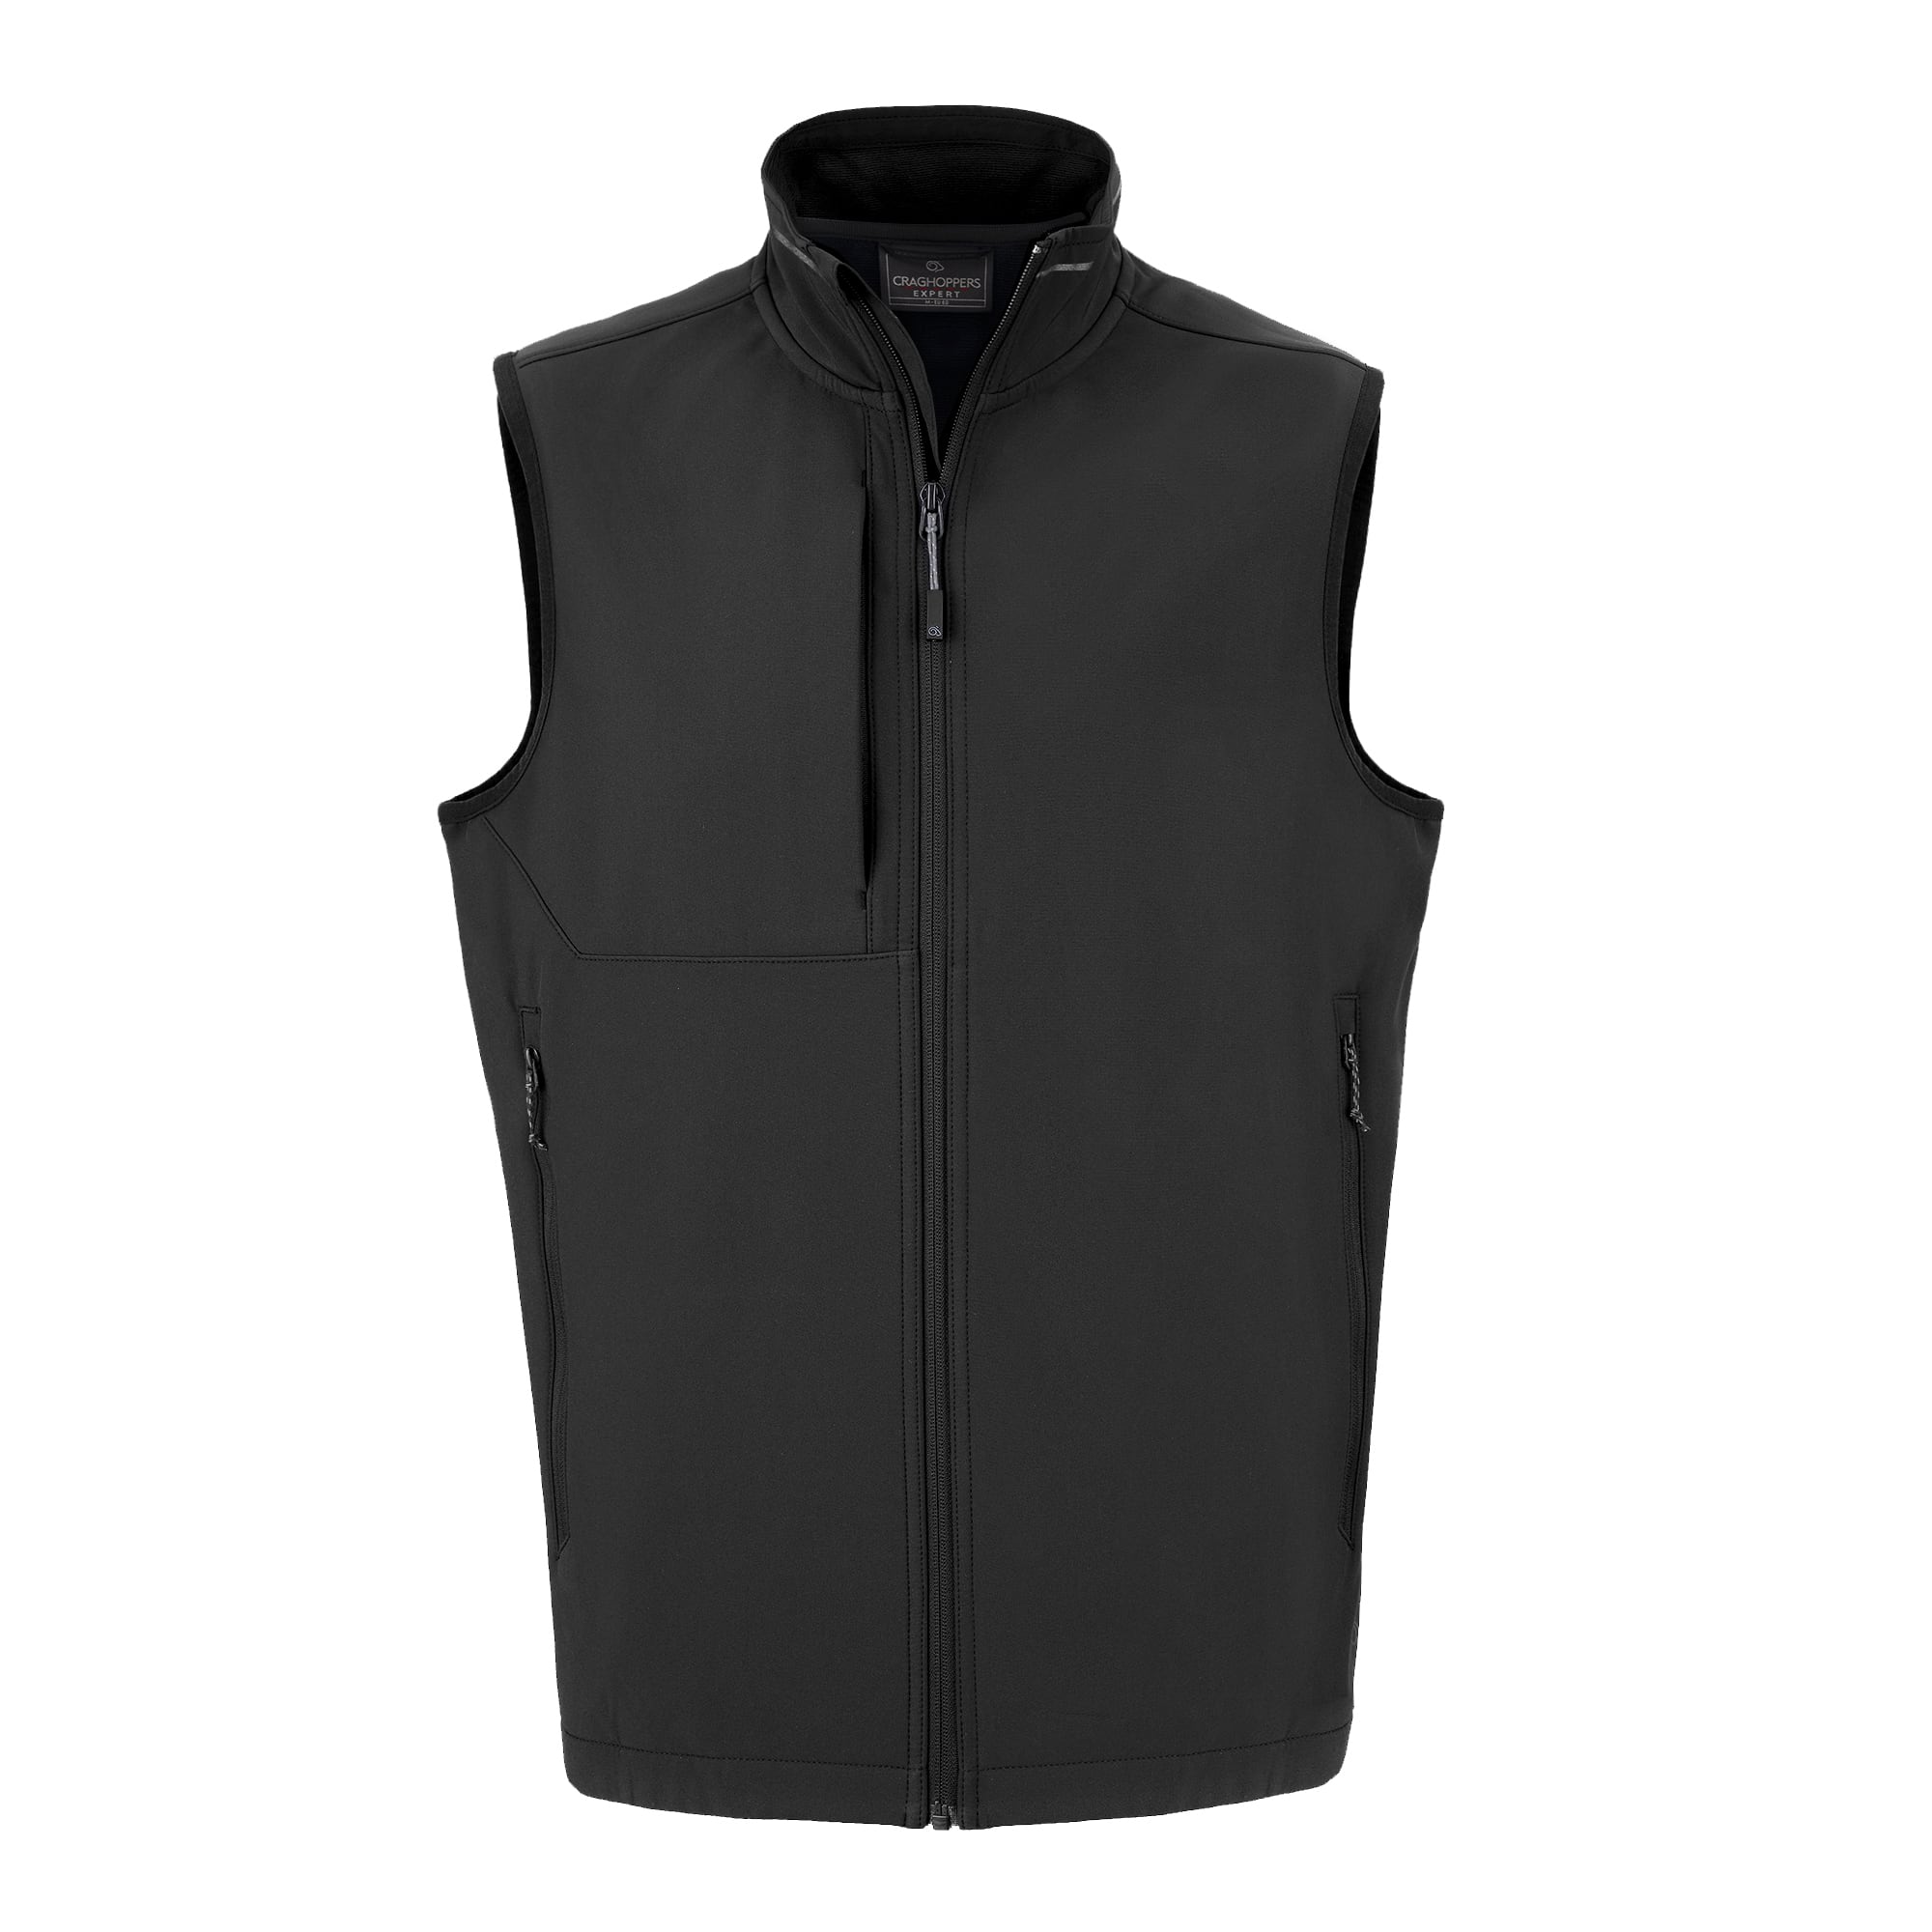 Unisex Expert Basecamp Softshell Vest | The Outdoors Company